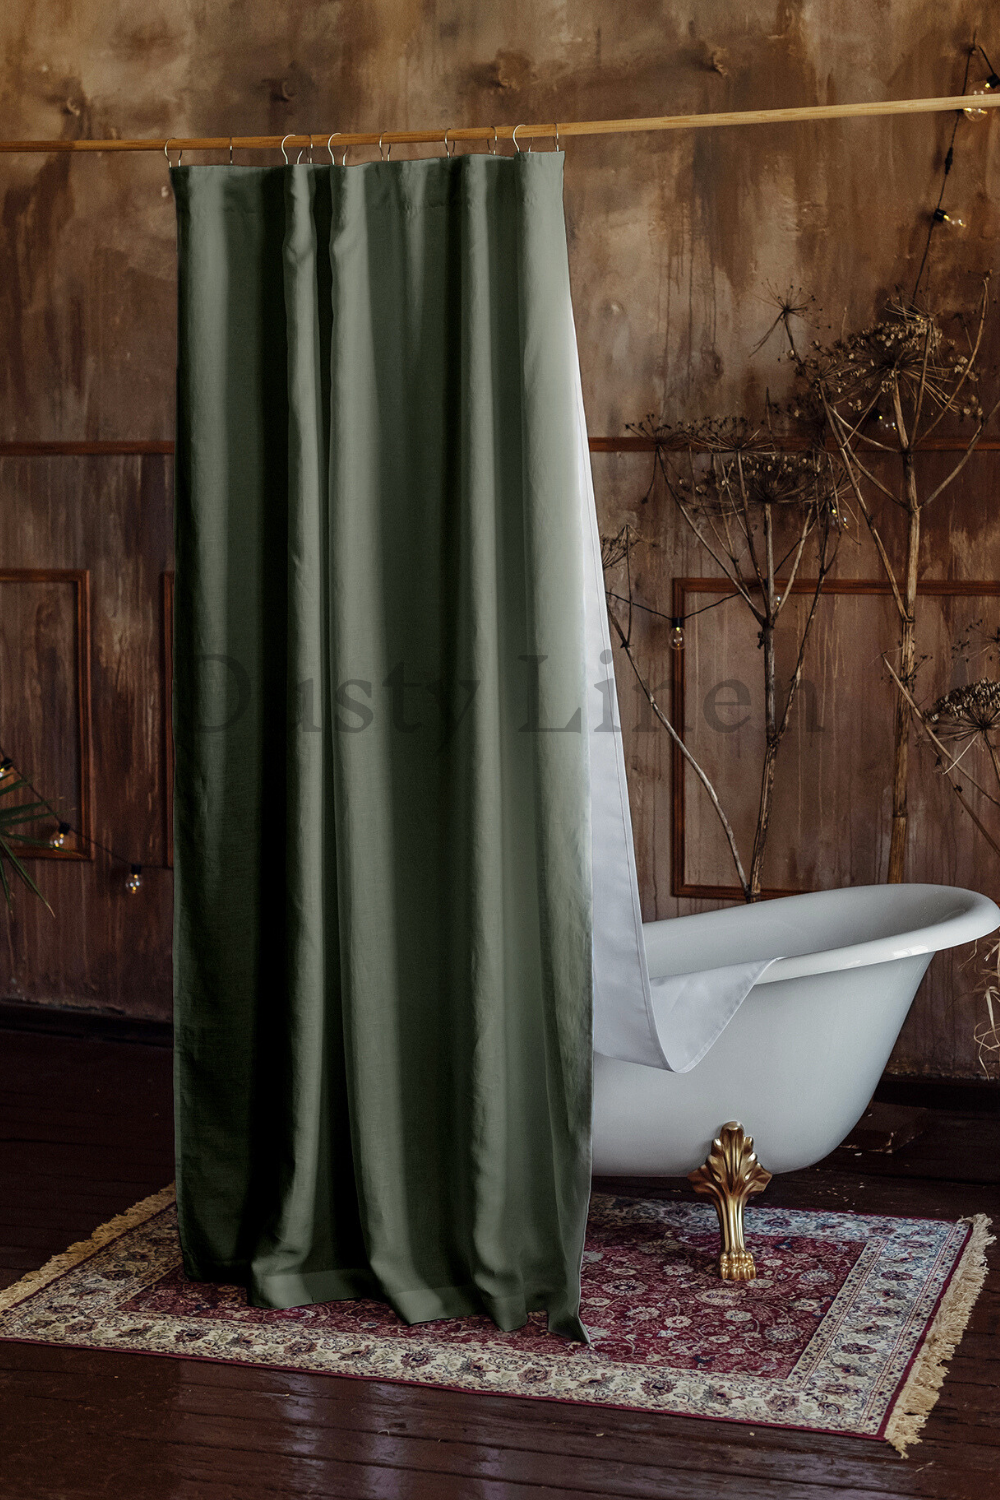 Dusty Linen made best selling green color linen bath curtain for rustic interior